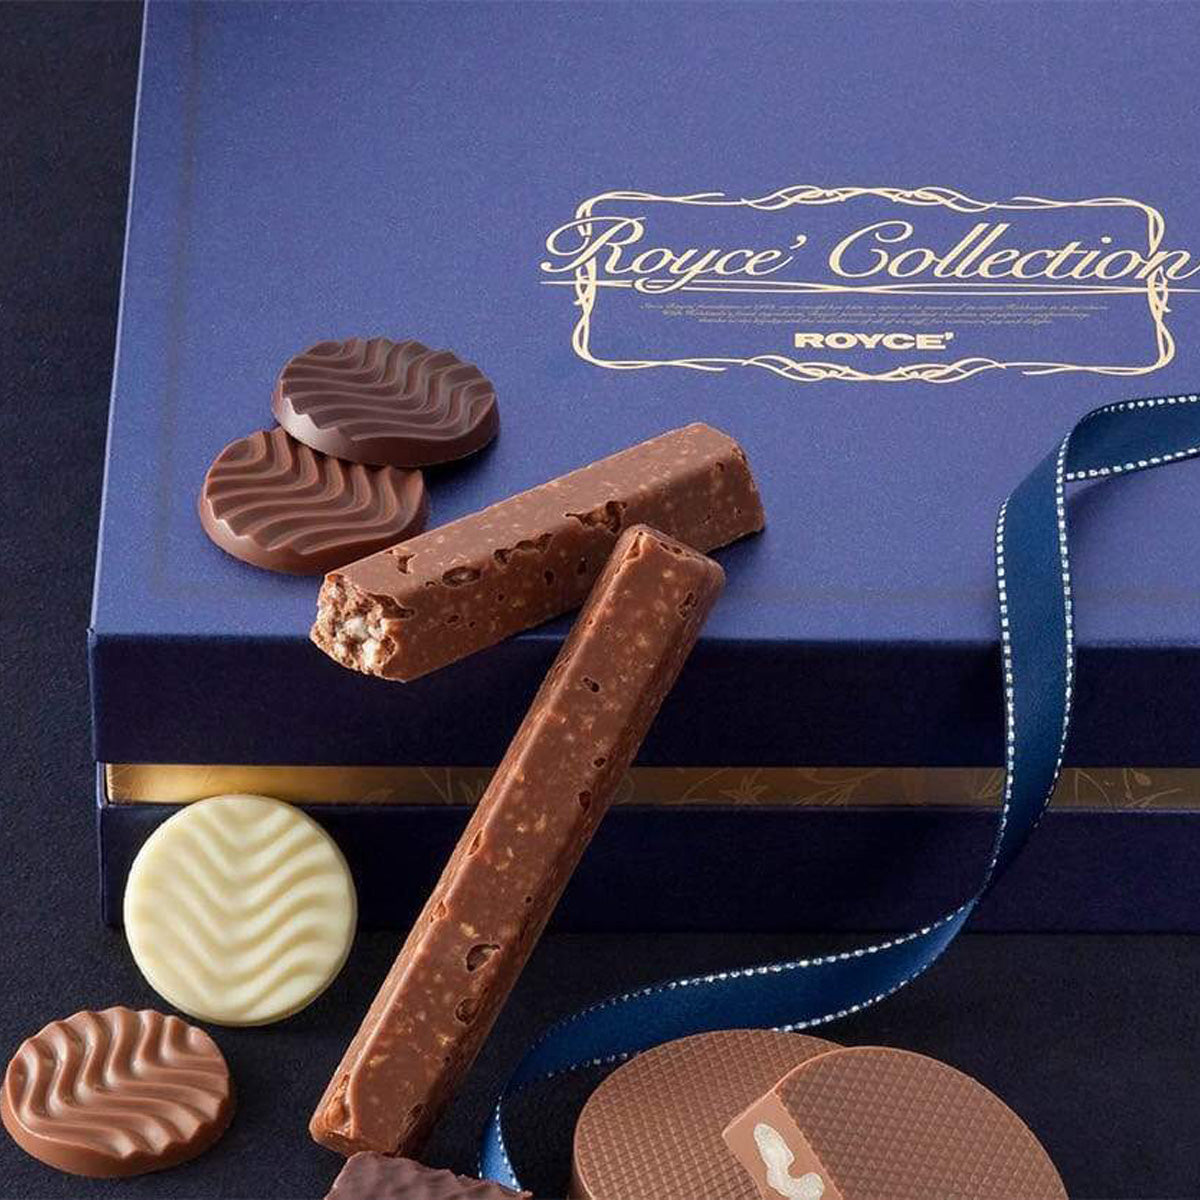 ROYCE' Chocolate - ROYCE' Collection "Blue" - Image shows a blue box. Gold text says ROYCE' Collection ROYCE'. Below the box are a mix of confections in various shapes and colors, with a blue ribbon accent.